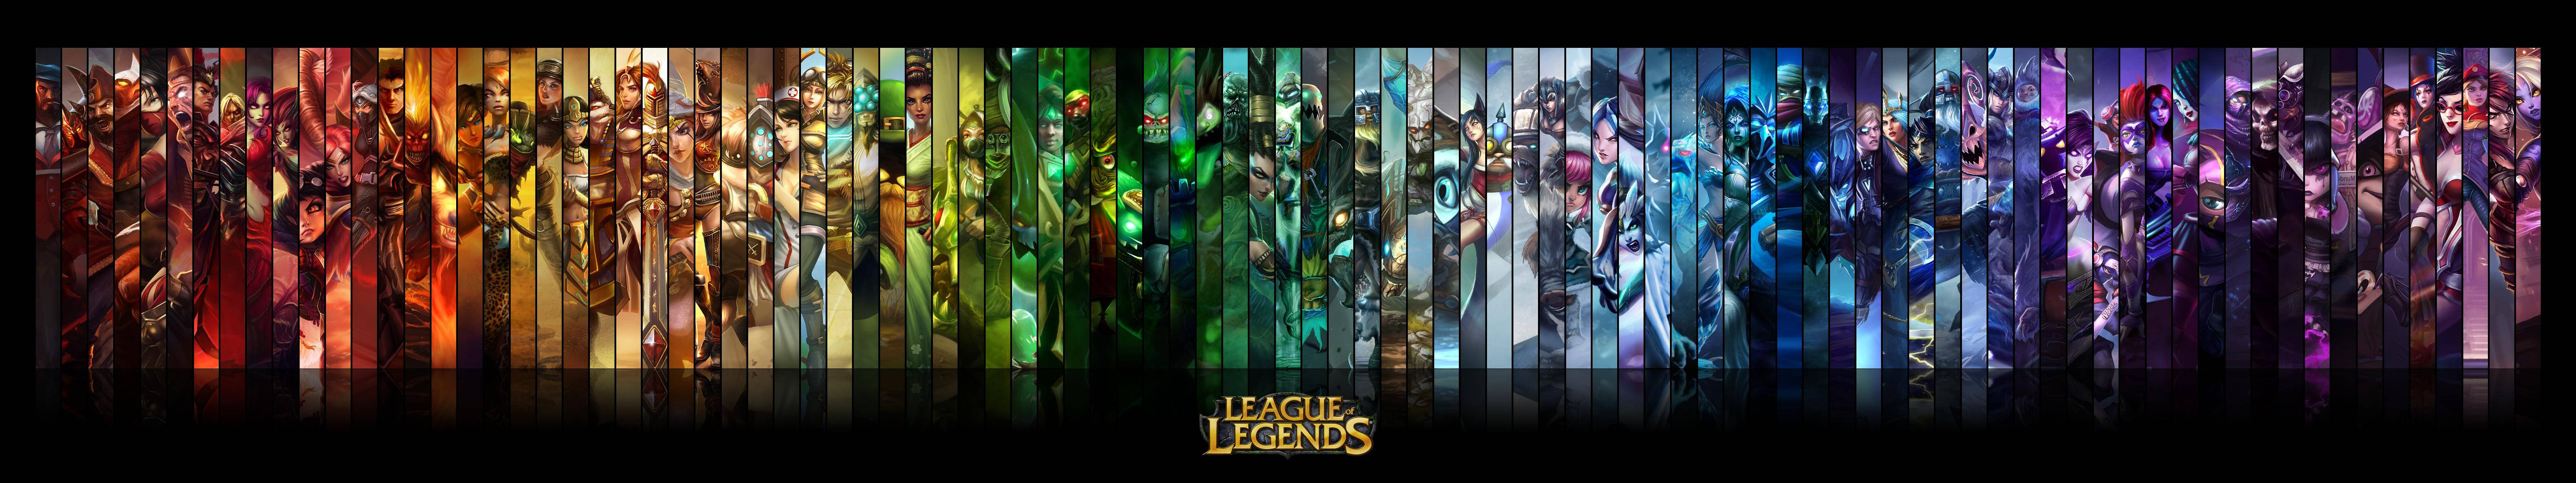 Triple Monitor League Of Legends characters in vertical position arranged according to colors.